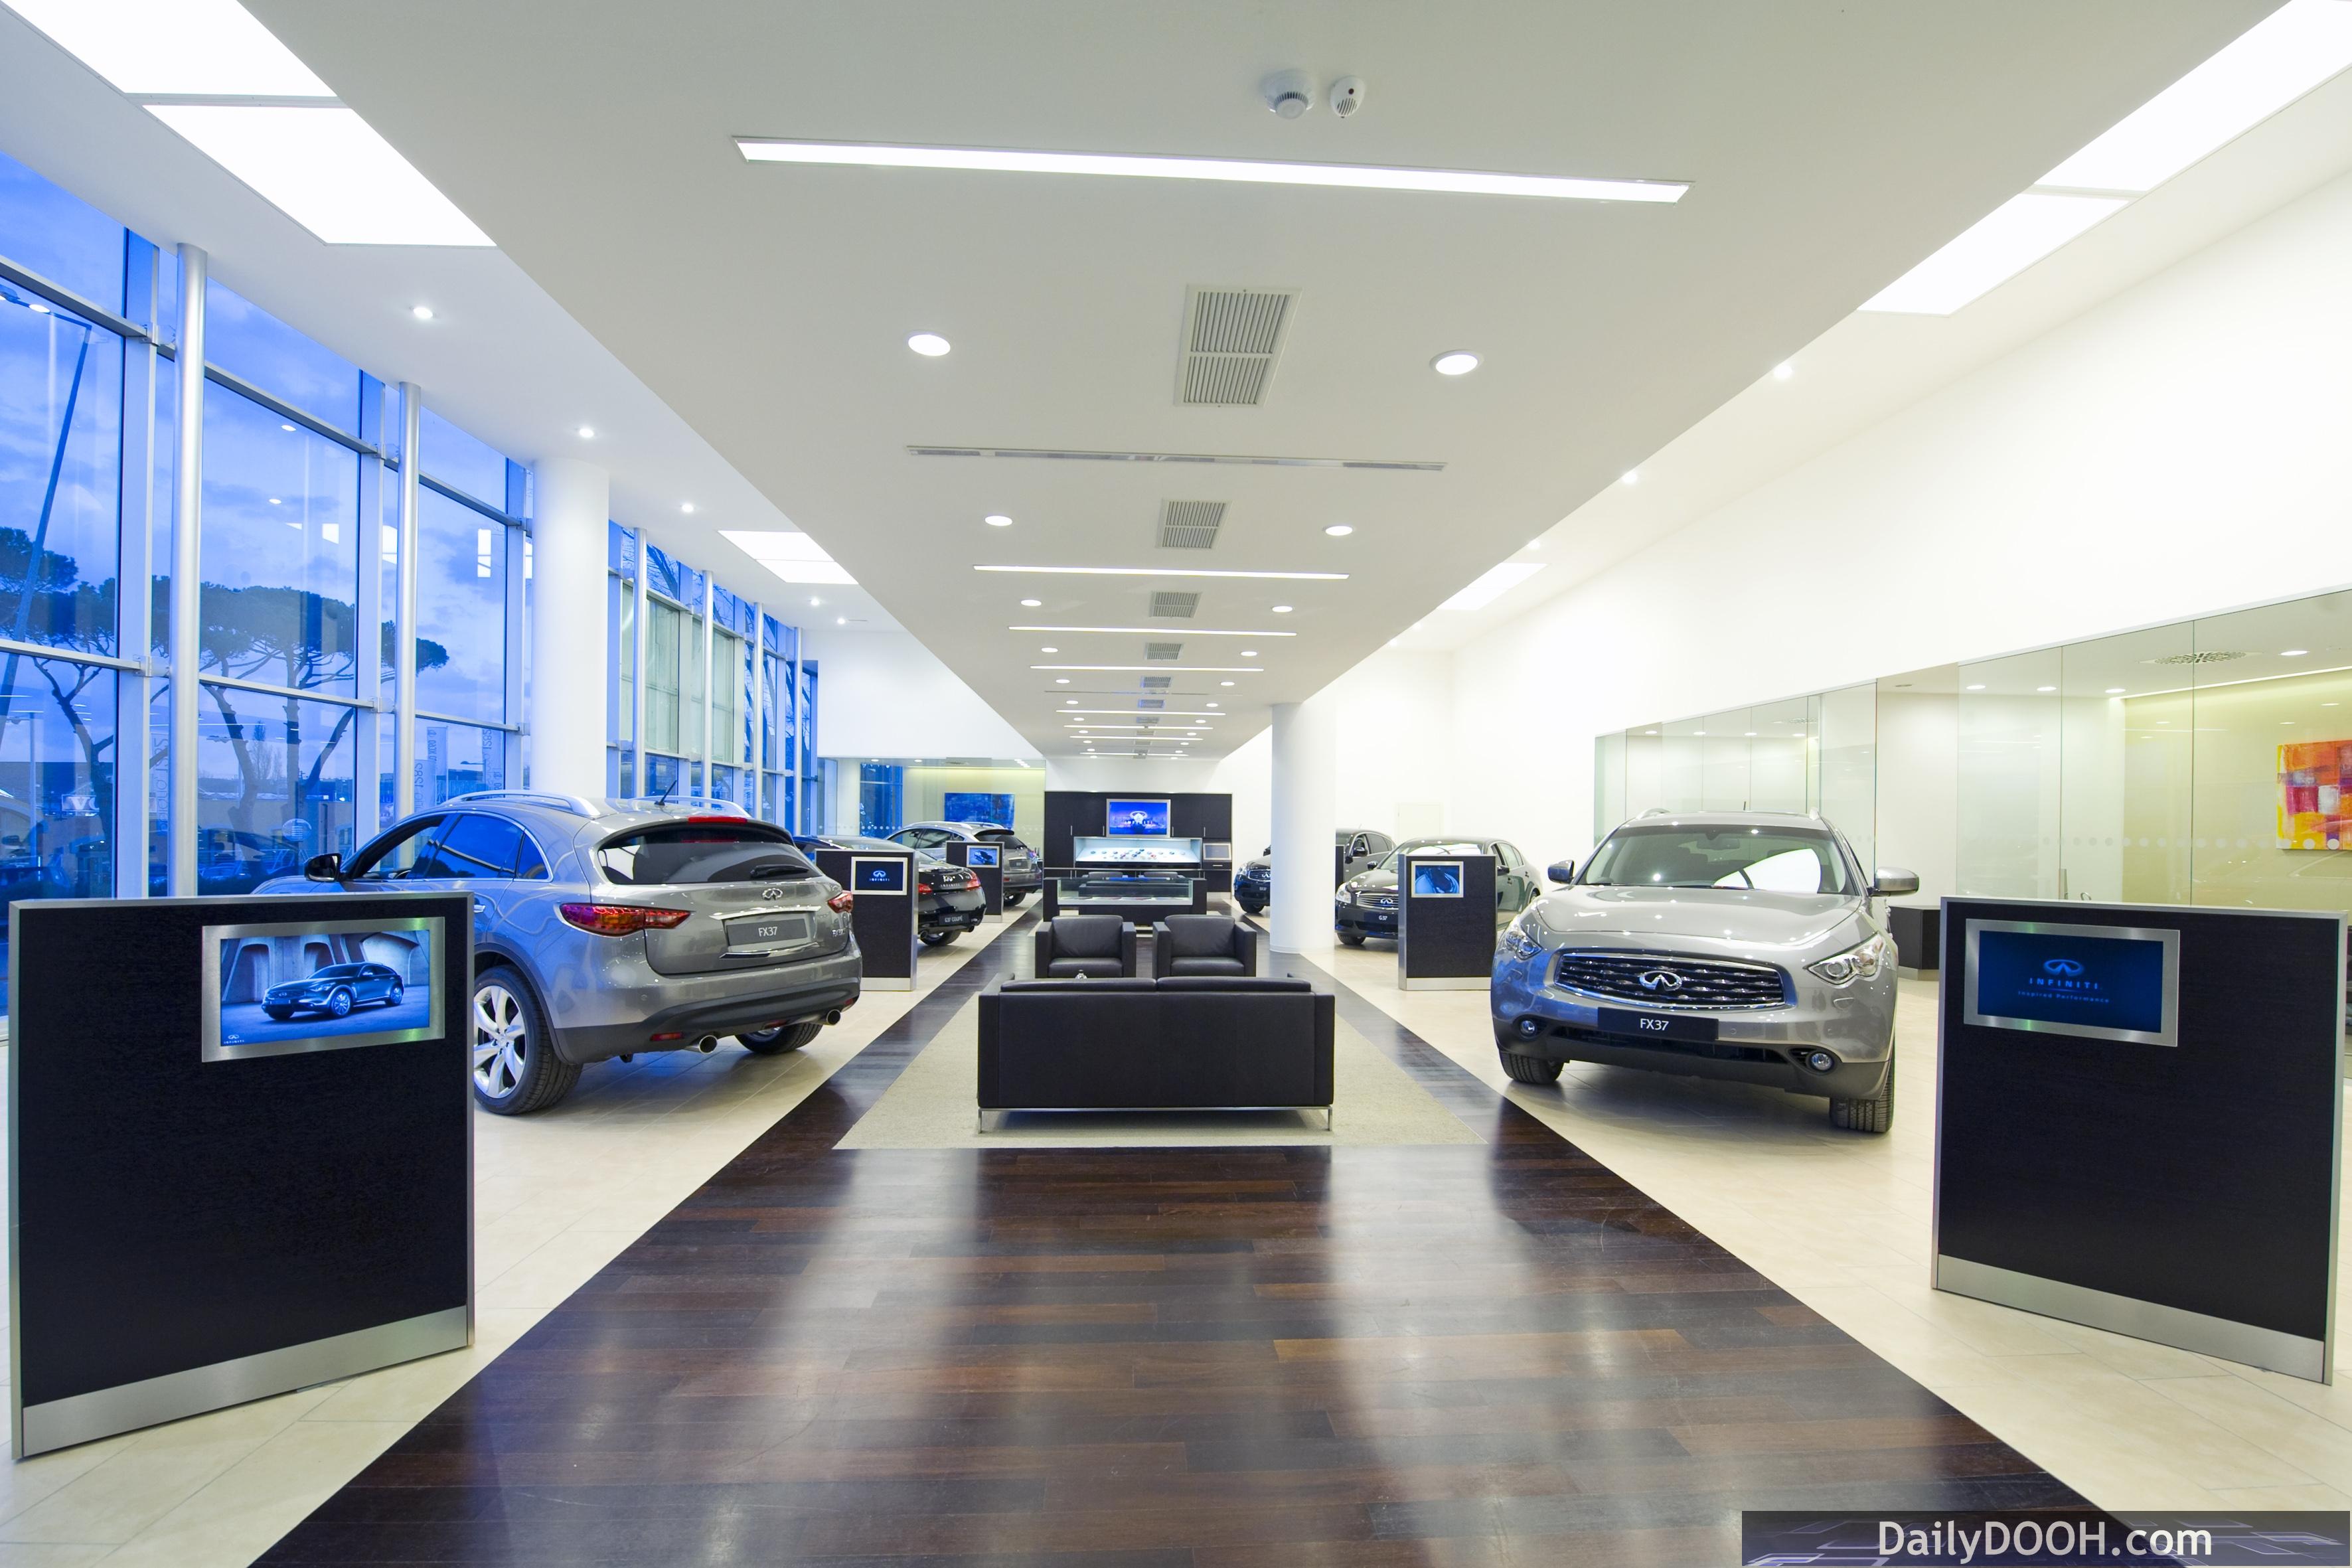 Please feel free to explore our website to see our extensive inventory of new and used cars and suvs. DailyDOOH Â» Blog Archive Â» Scala-backed Signage At Infiniti Showrooms